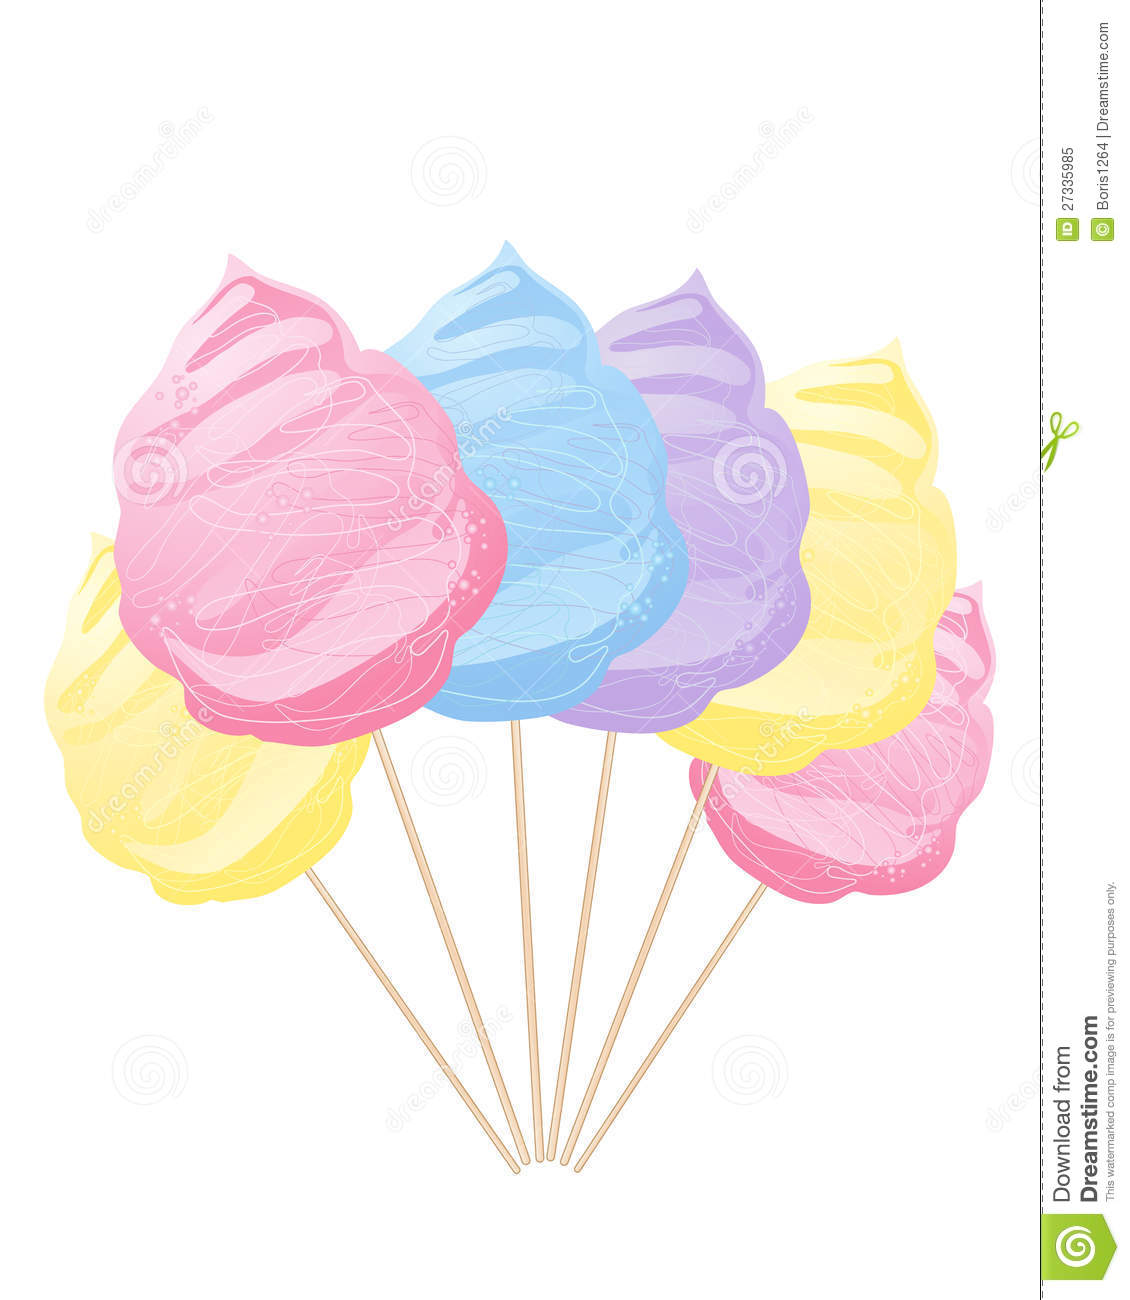 Cotton Candy Royalty Free Stock Photo   Image  27335985